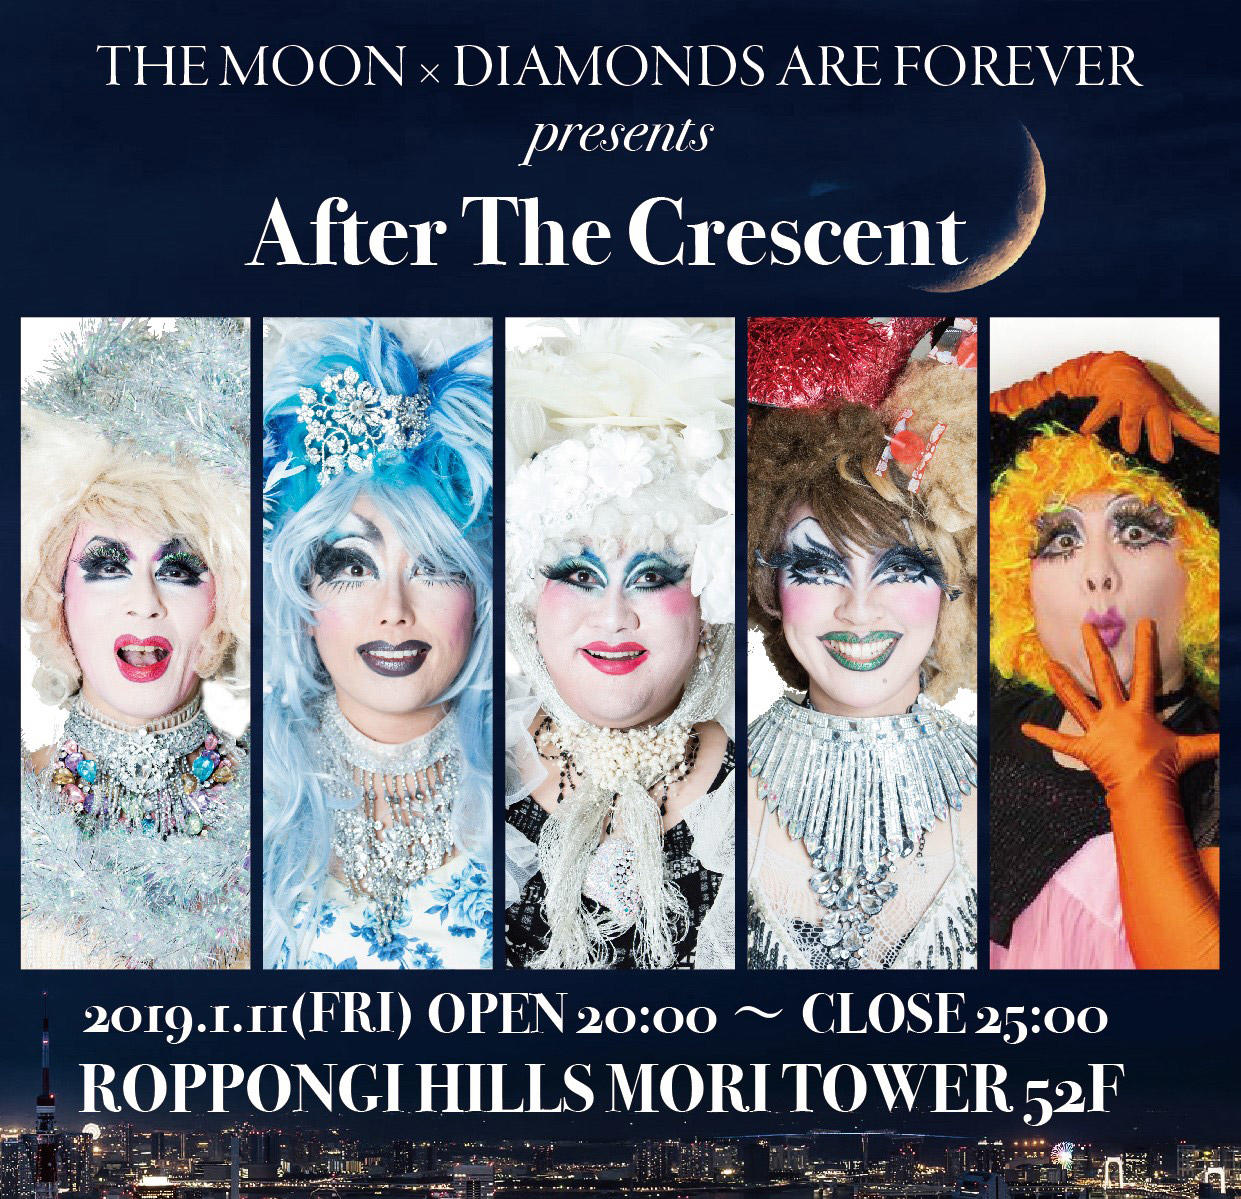 THE MOON×DIAMONDS ARE FOREVER presents “After The Crescent”